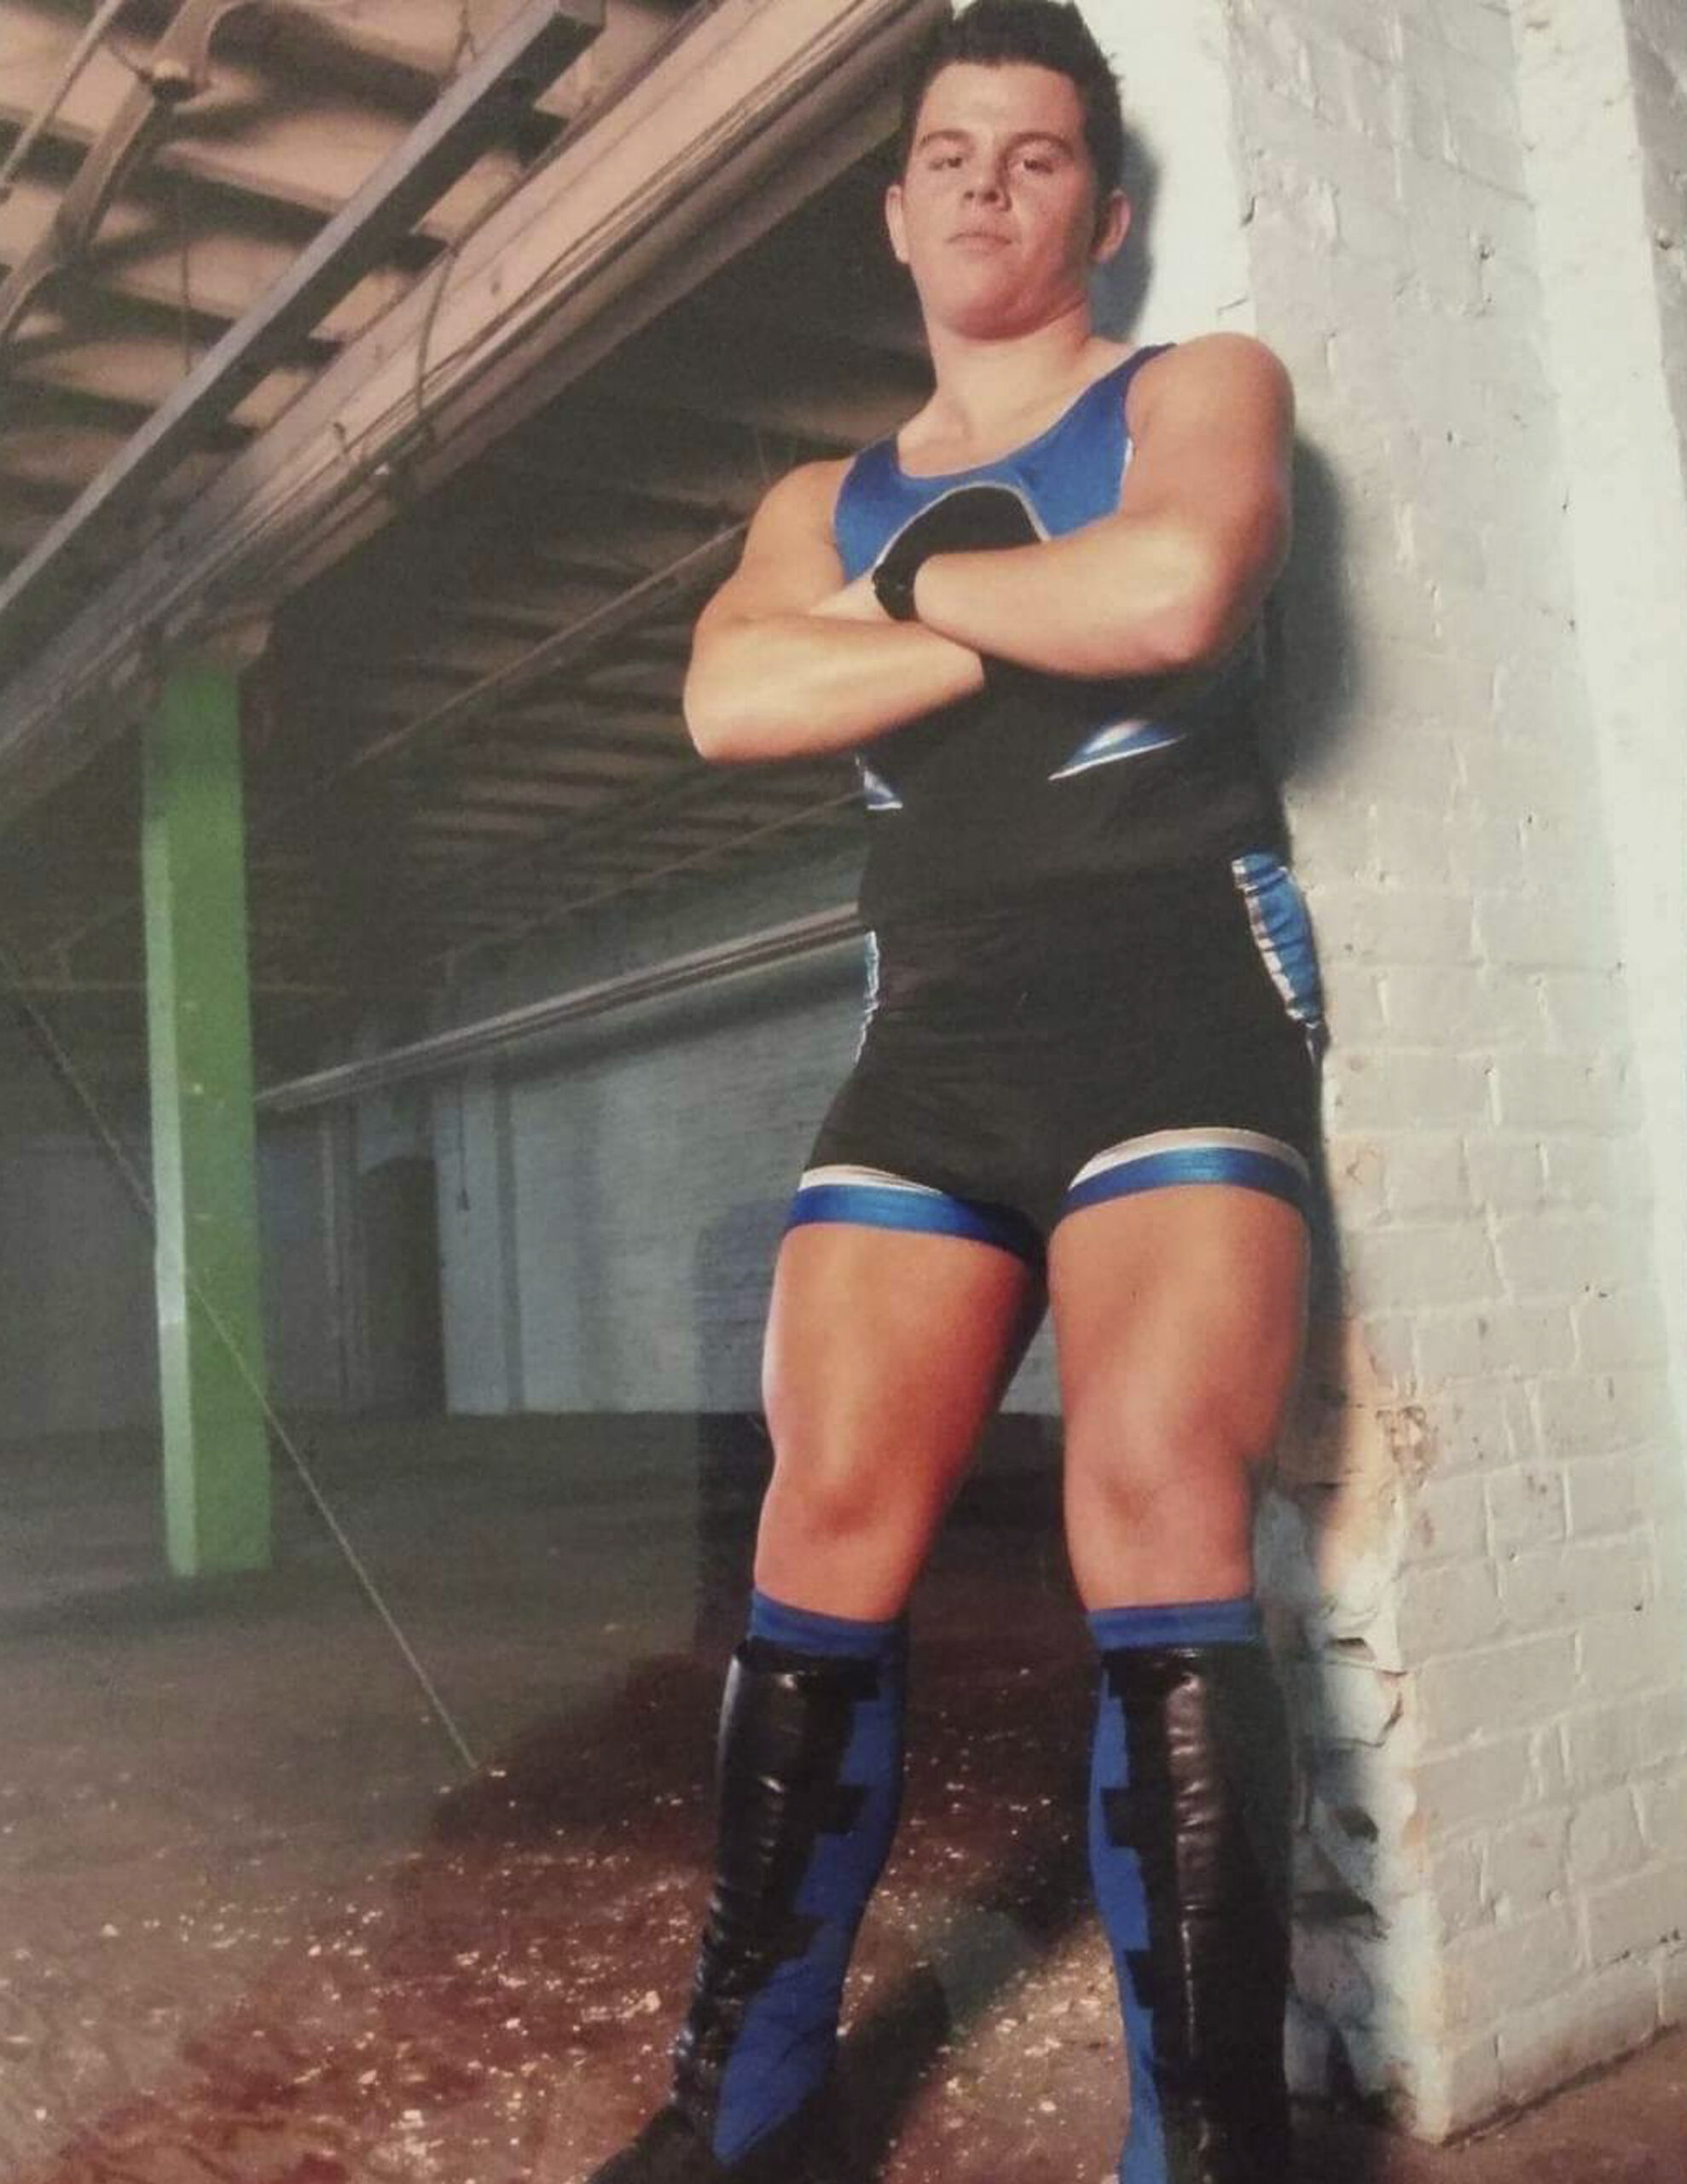 Professional wrestler Stefan Richard stands up against a brick wall for a promotional photo.